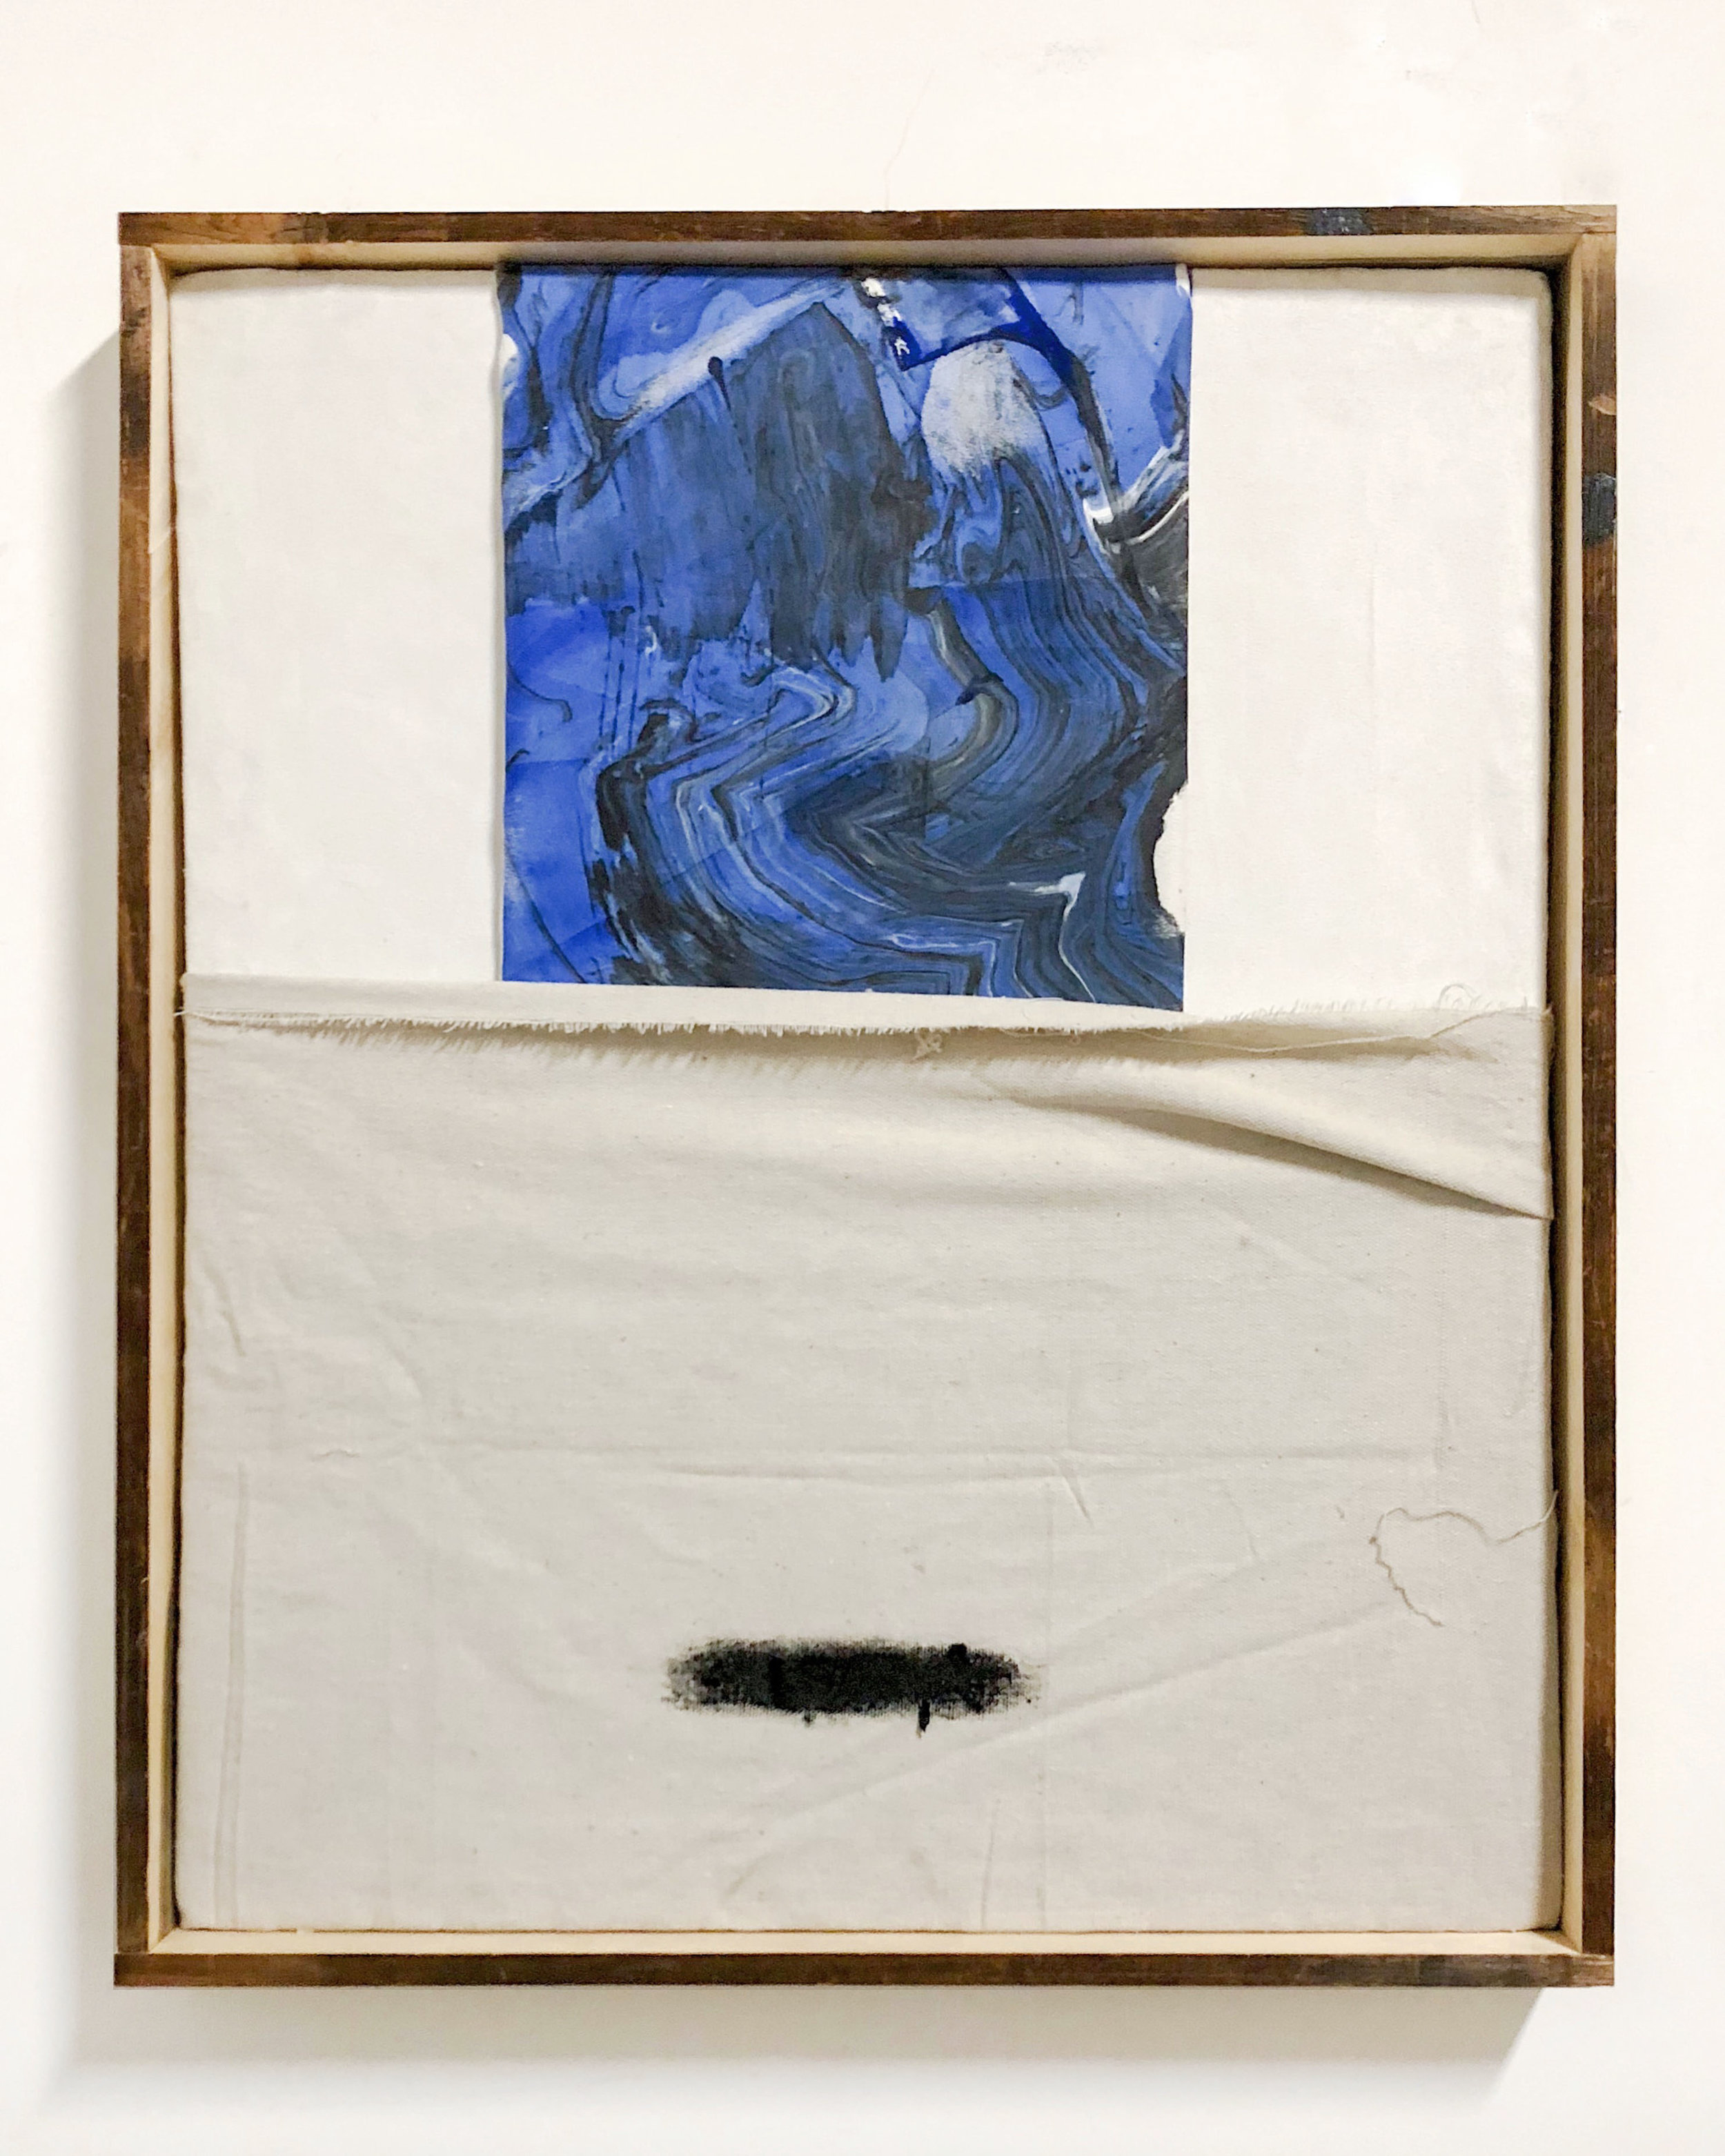 SHIV'AH6, gesso, oil stick and ink with sand from the West Bank and Israel on linen and microsuede. Stretched on silkscreen frame, 21" x 25" inches, 2017